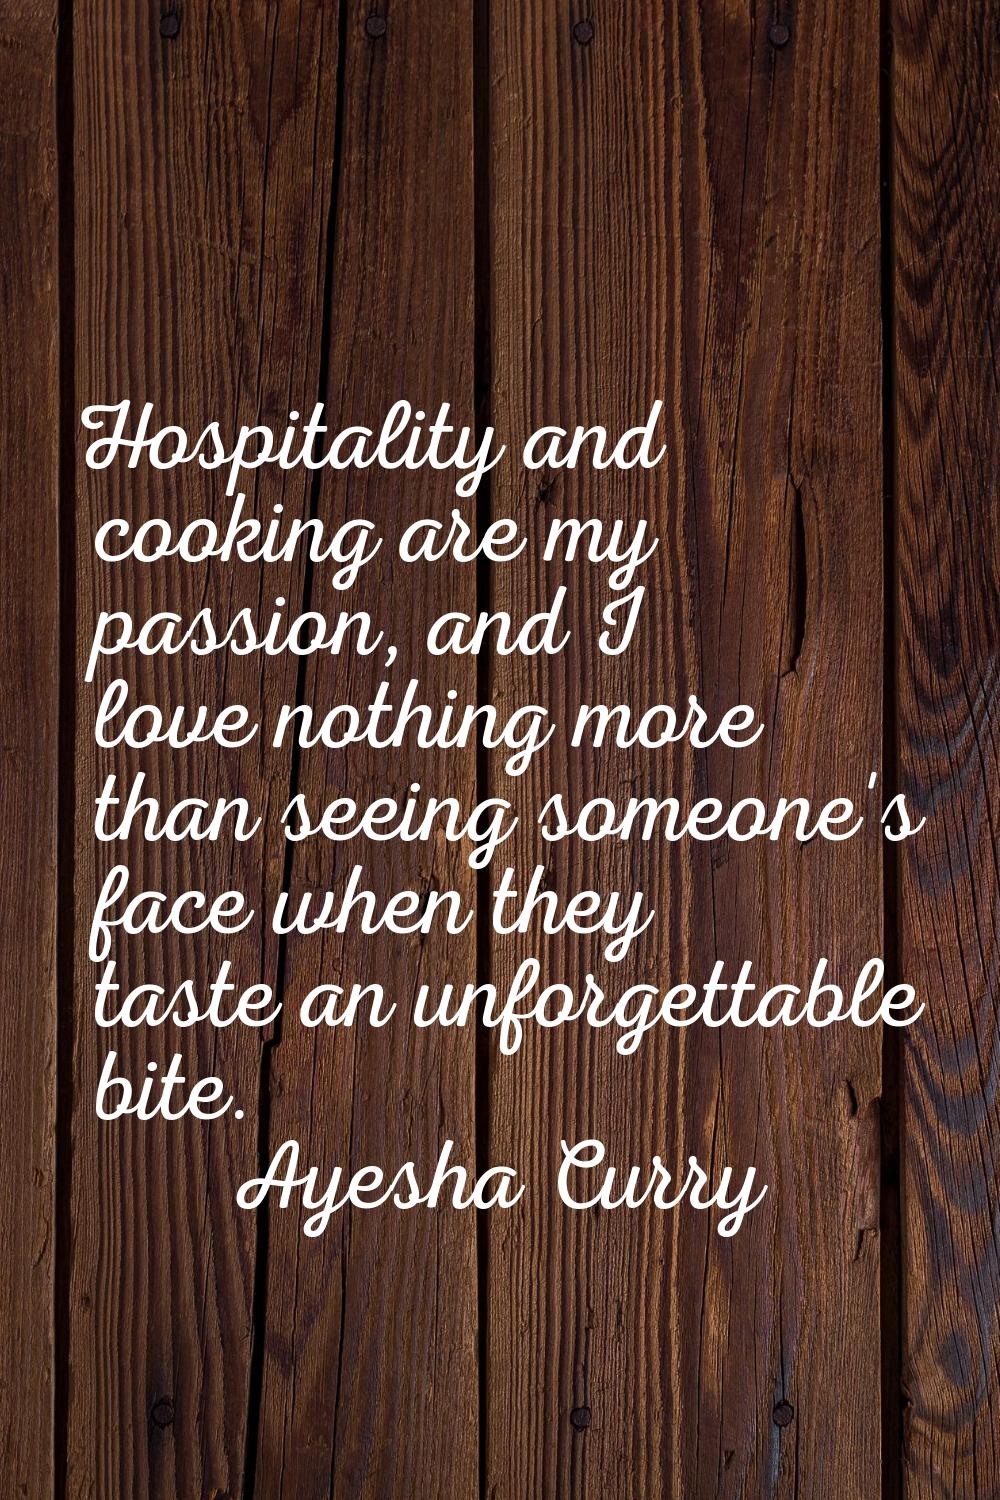 Hospitality and cooking are my passion, and I love nothing more than seeing someone's face when the